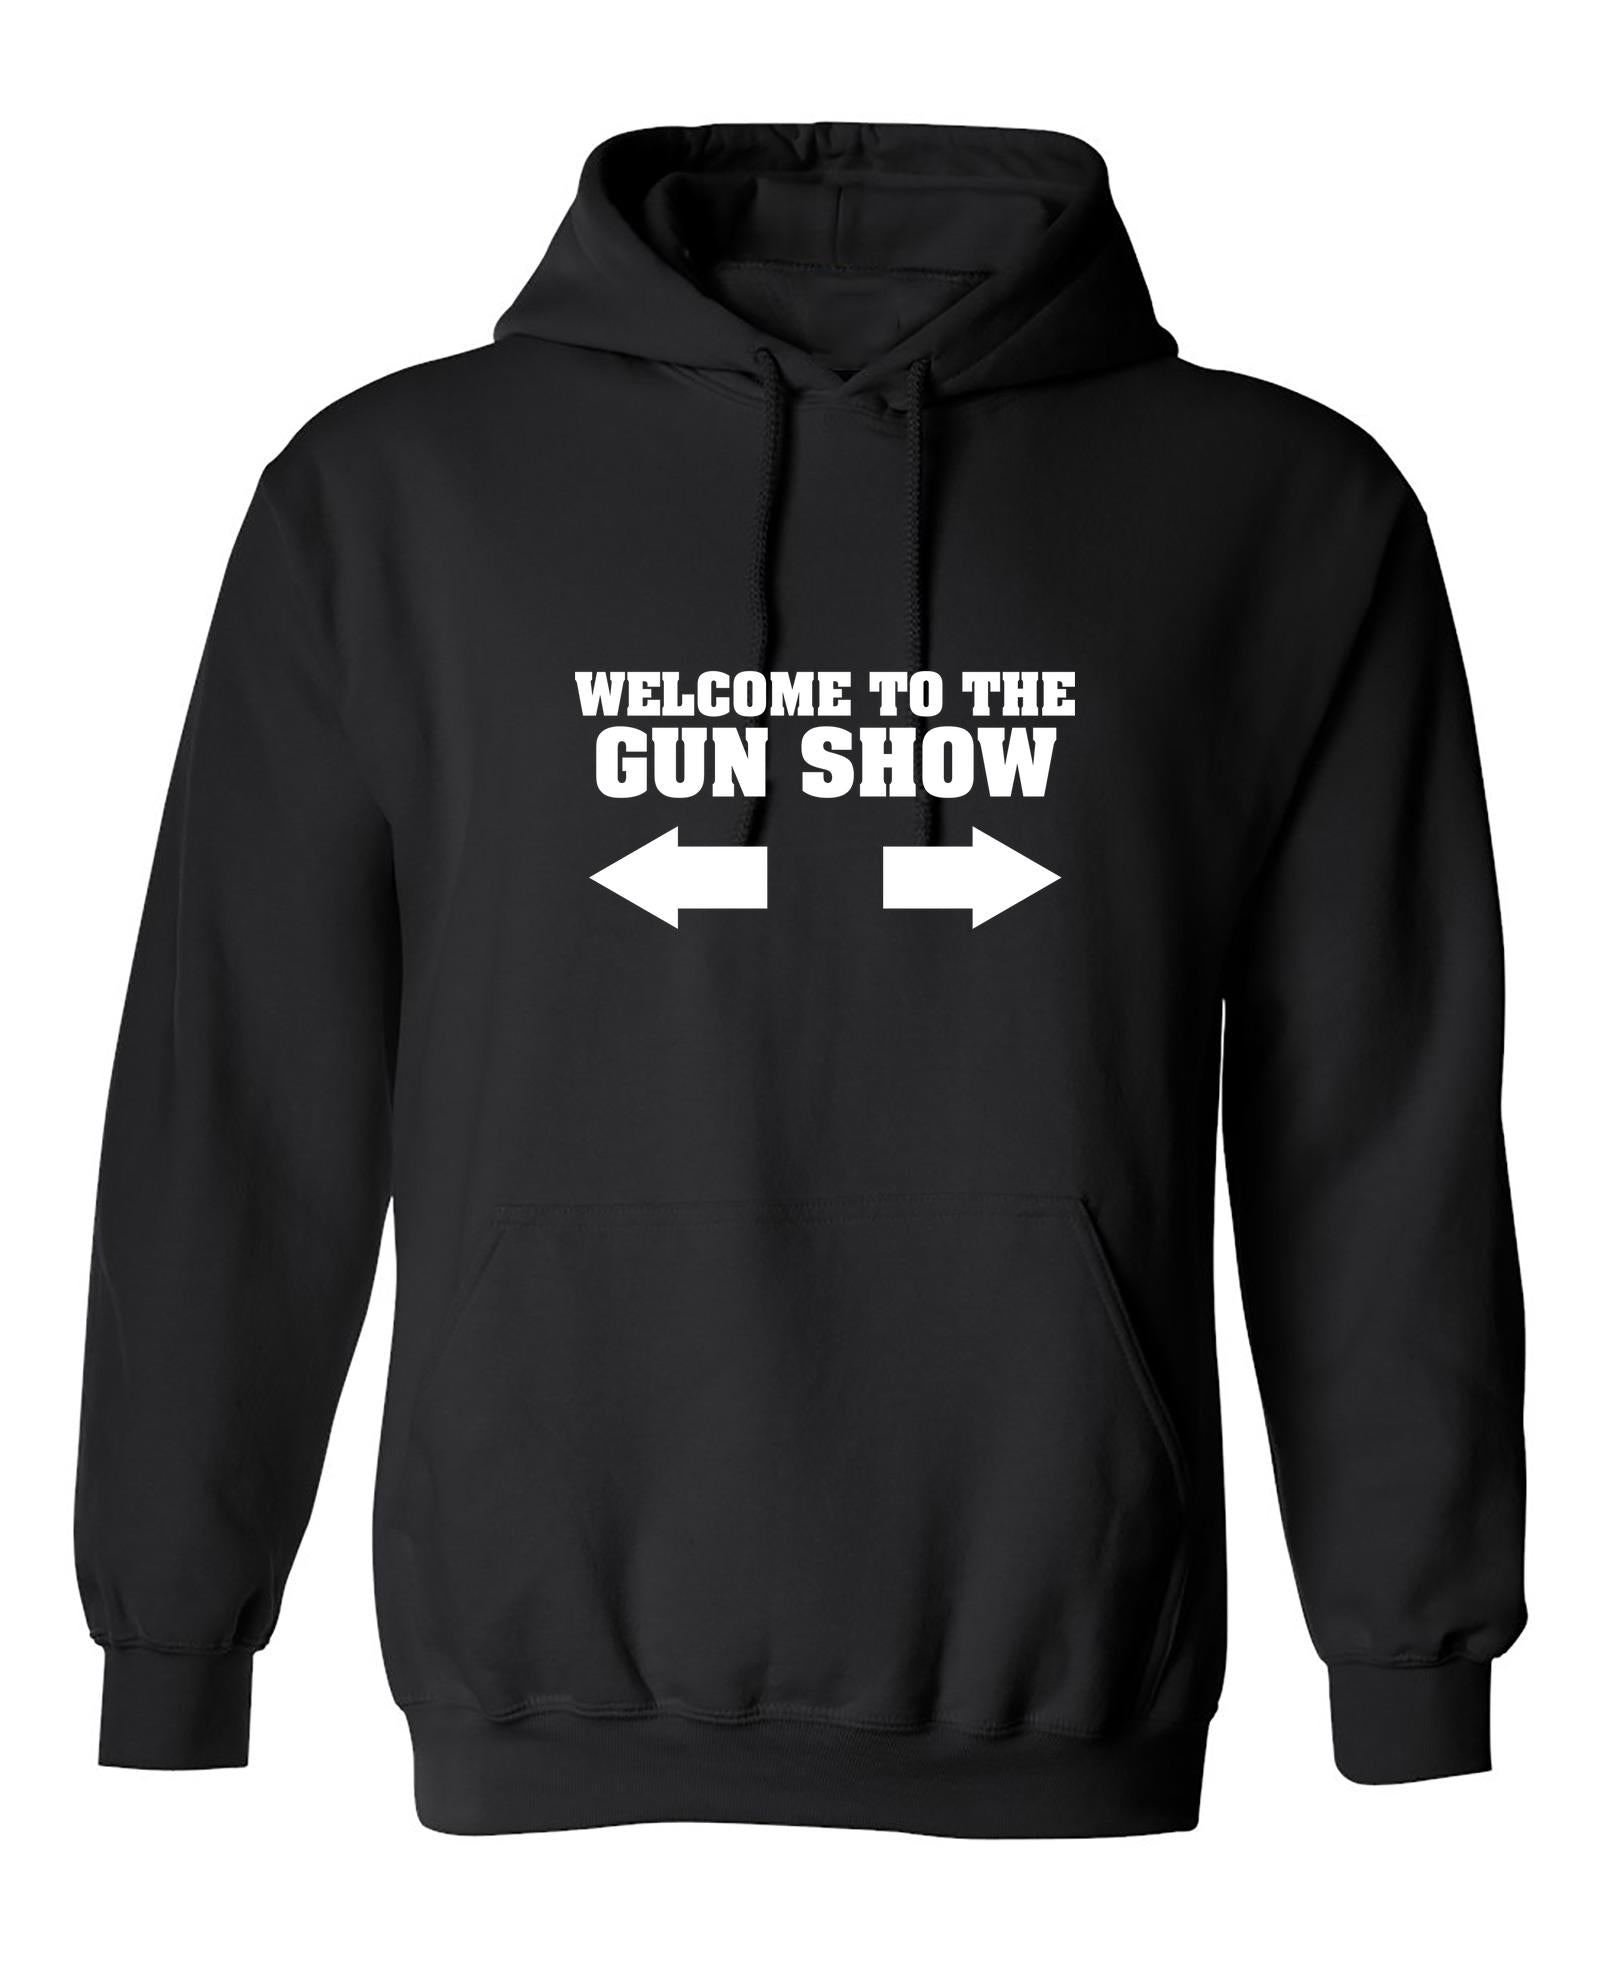 Funny T-Shirts design "Welcome to The Gun Show"